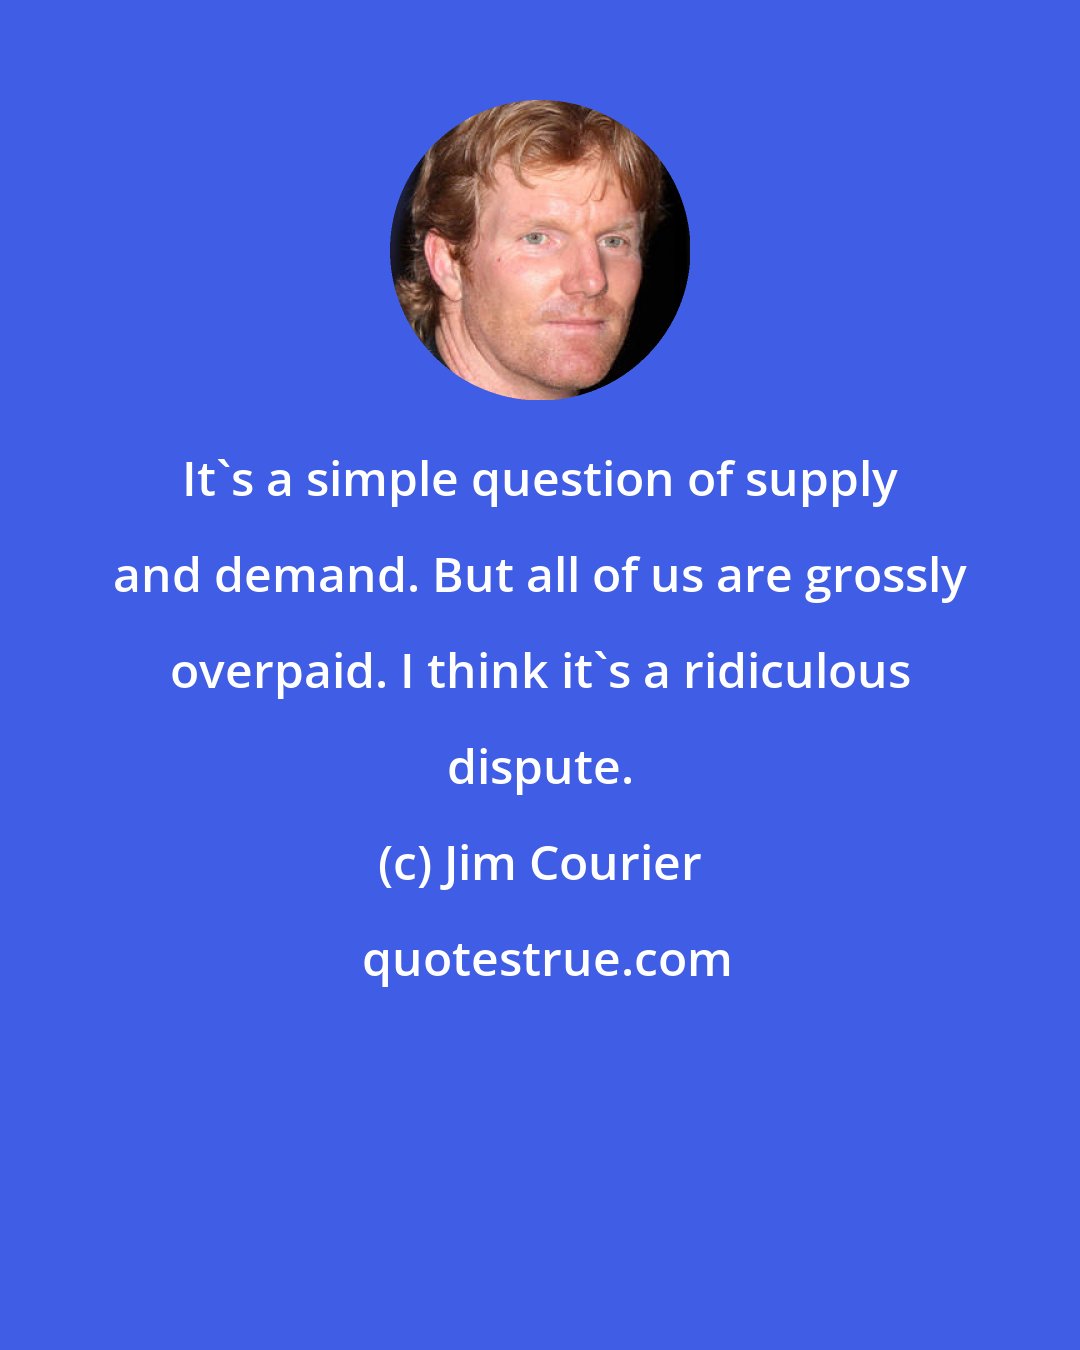 Jim Courier: It's a simple question of supply and demand. But all of us are grossly overpaid. I think it's a ridiculous dispute.